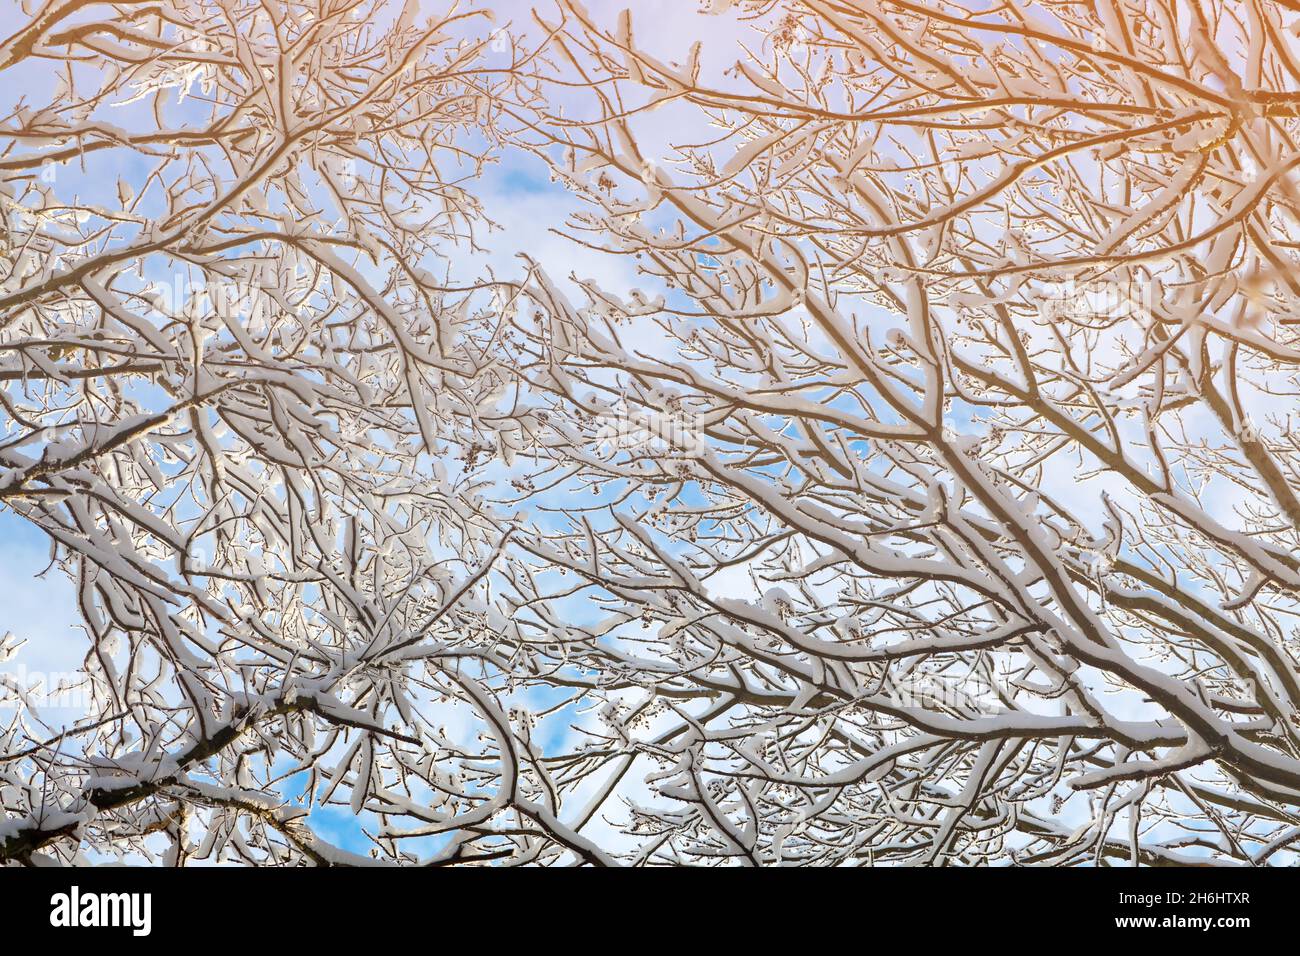 snow covered shrubs with a clear blue sky Stock Photo